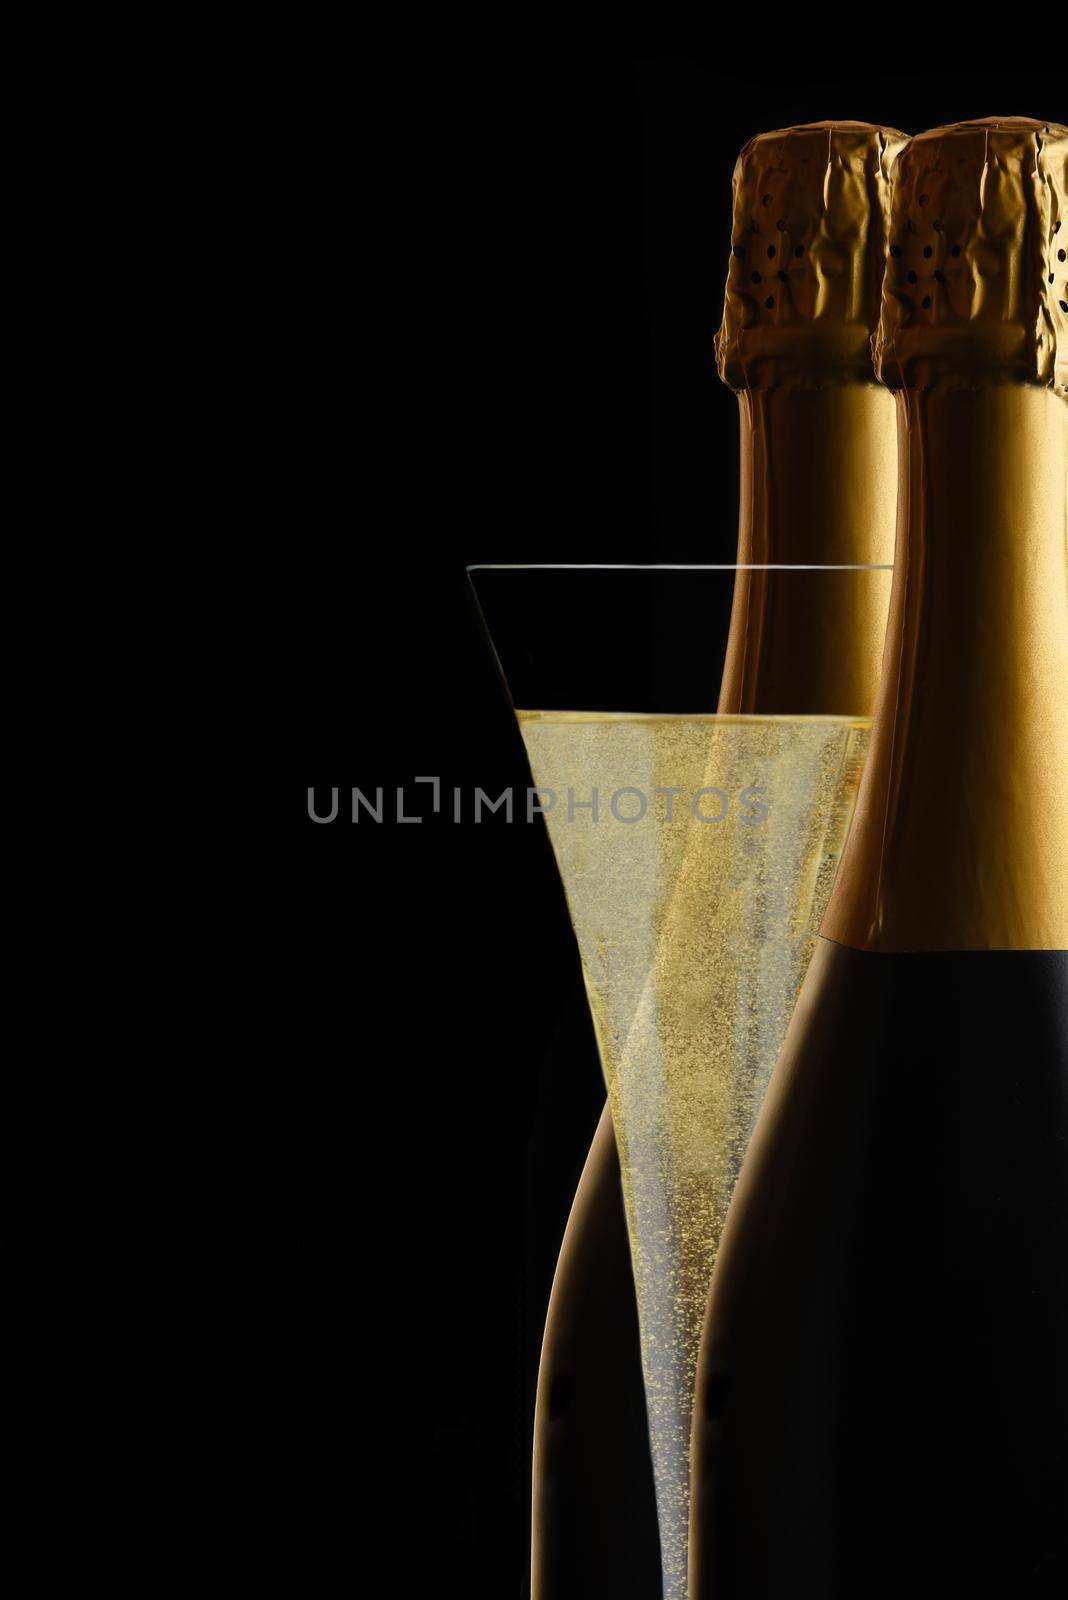 A Champagne Flute between two bottles of Sparkling Wine against a black background.. by sCukrov